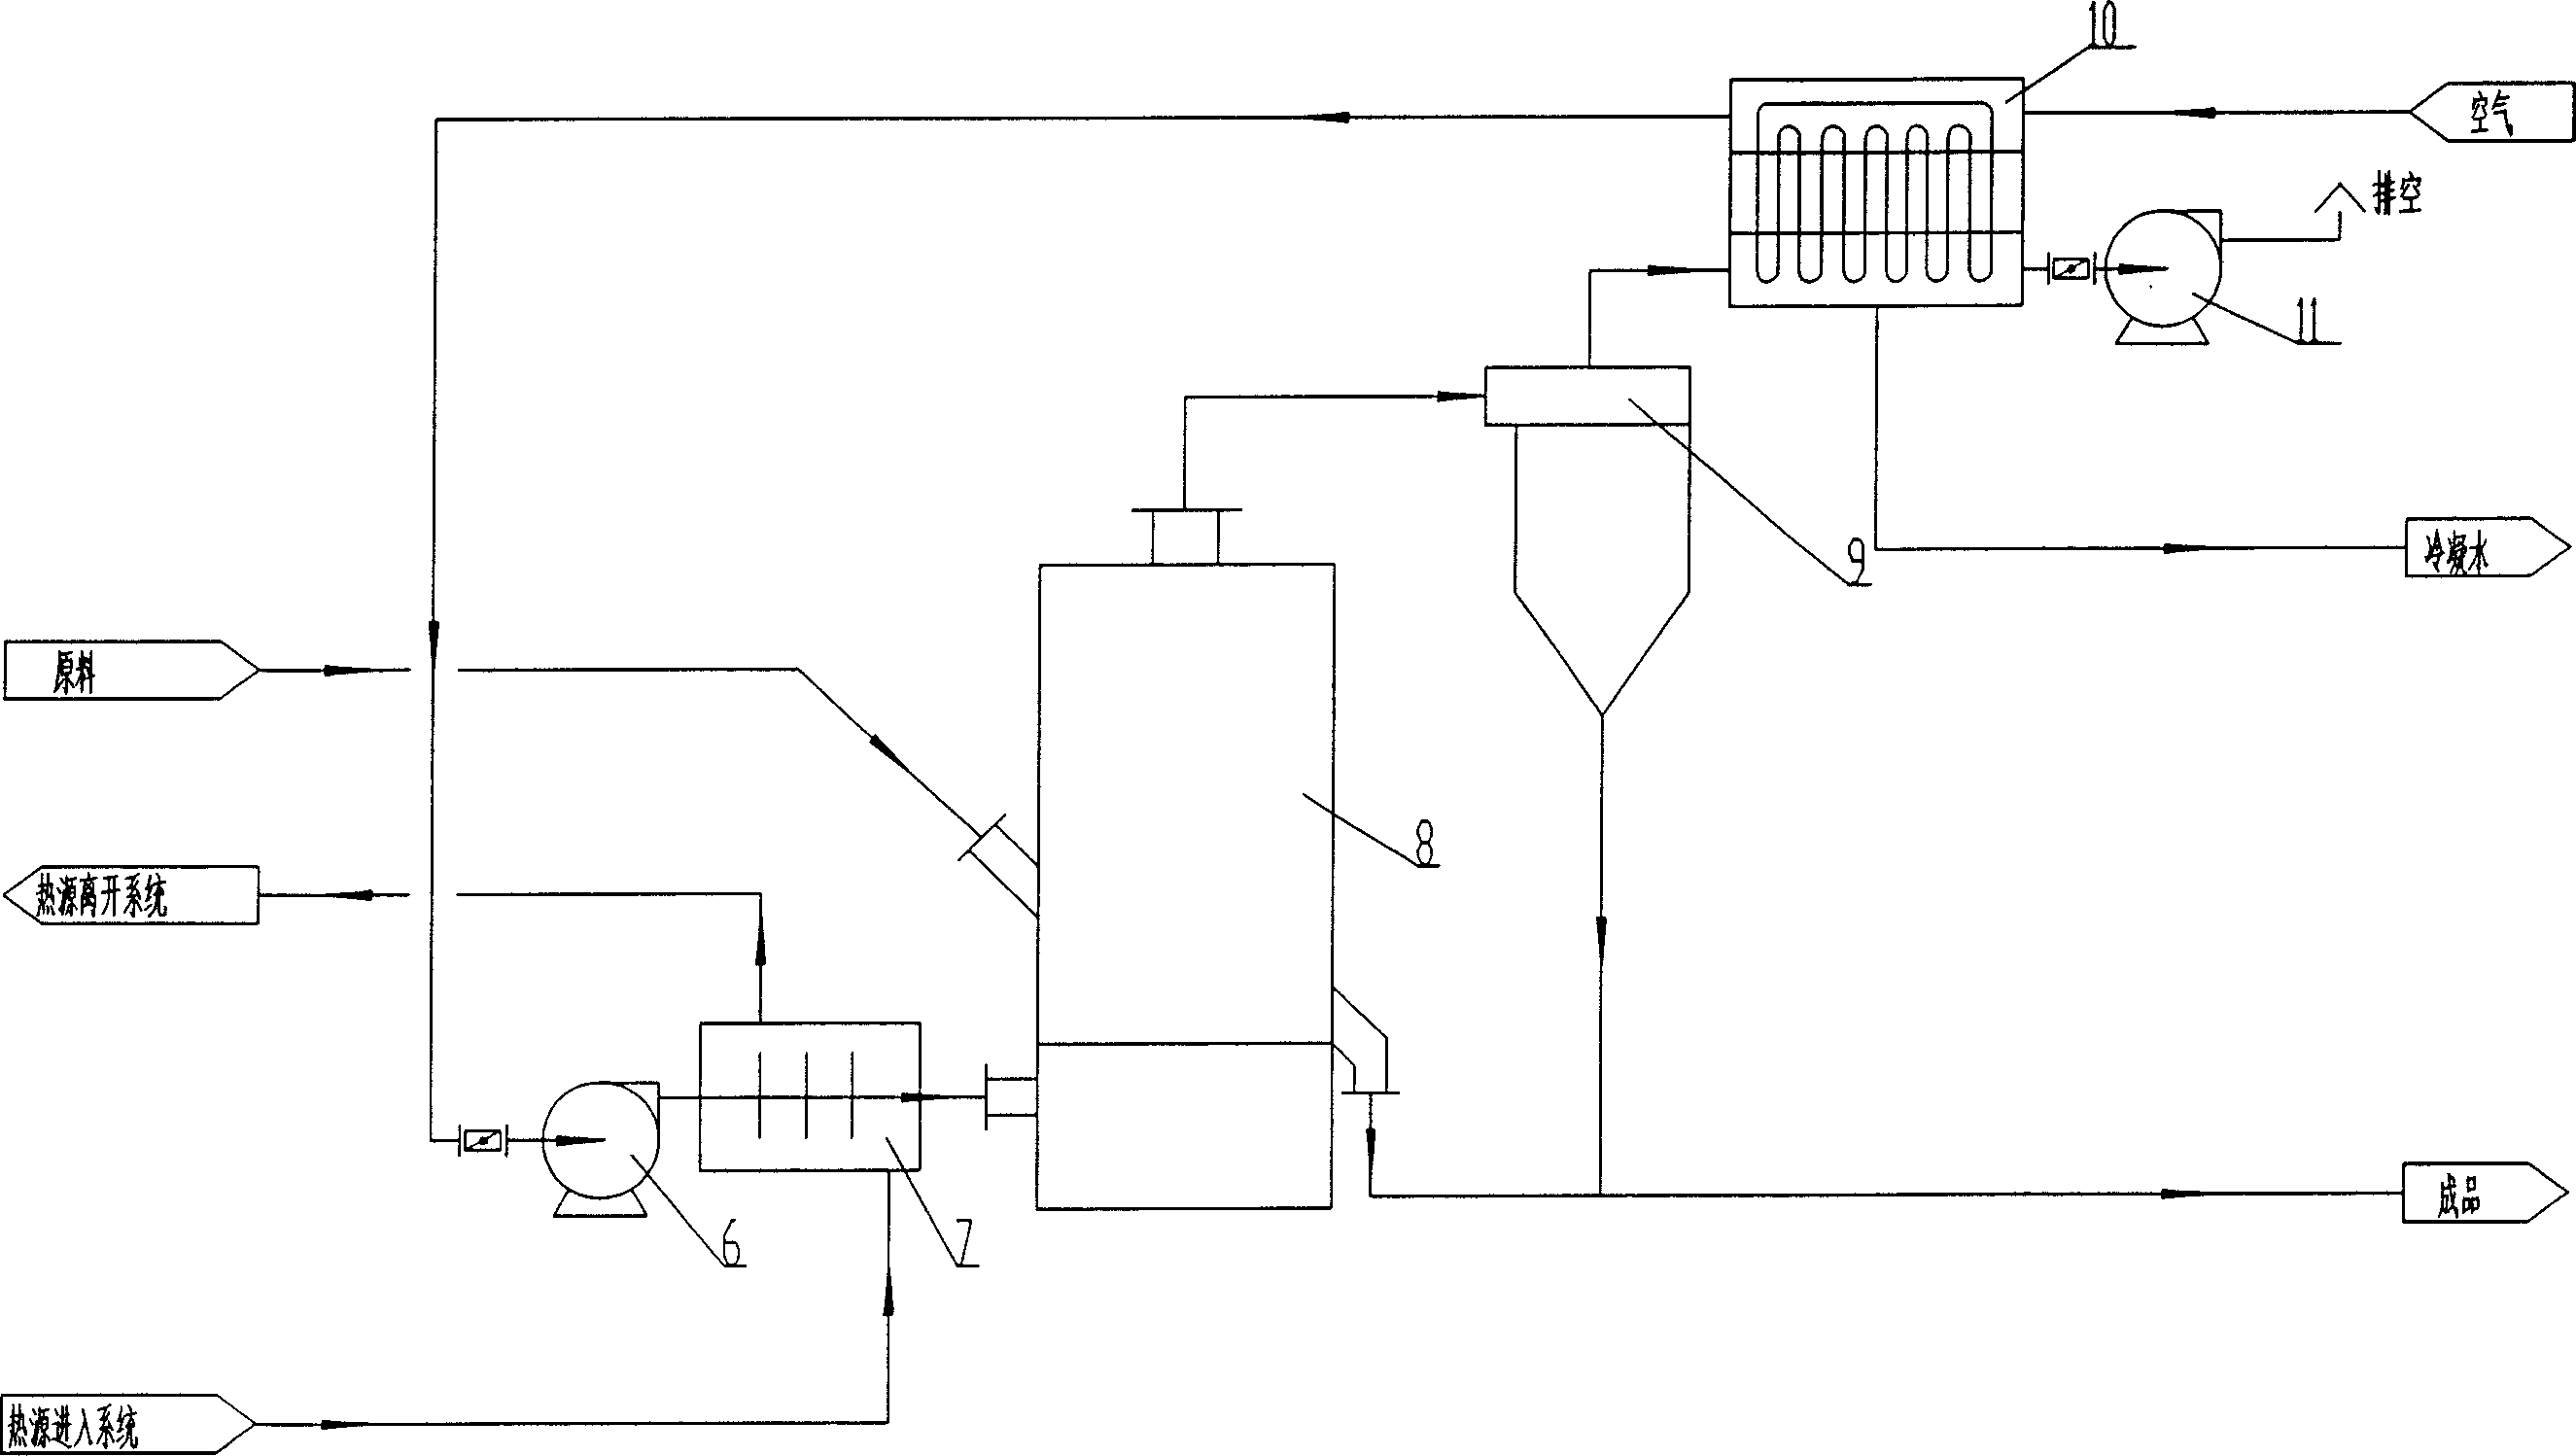 Air preheater of oscillatory flow type heat pipe, and energy saving drying technique of using the preheater